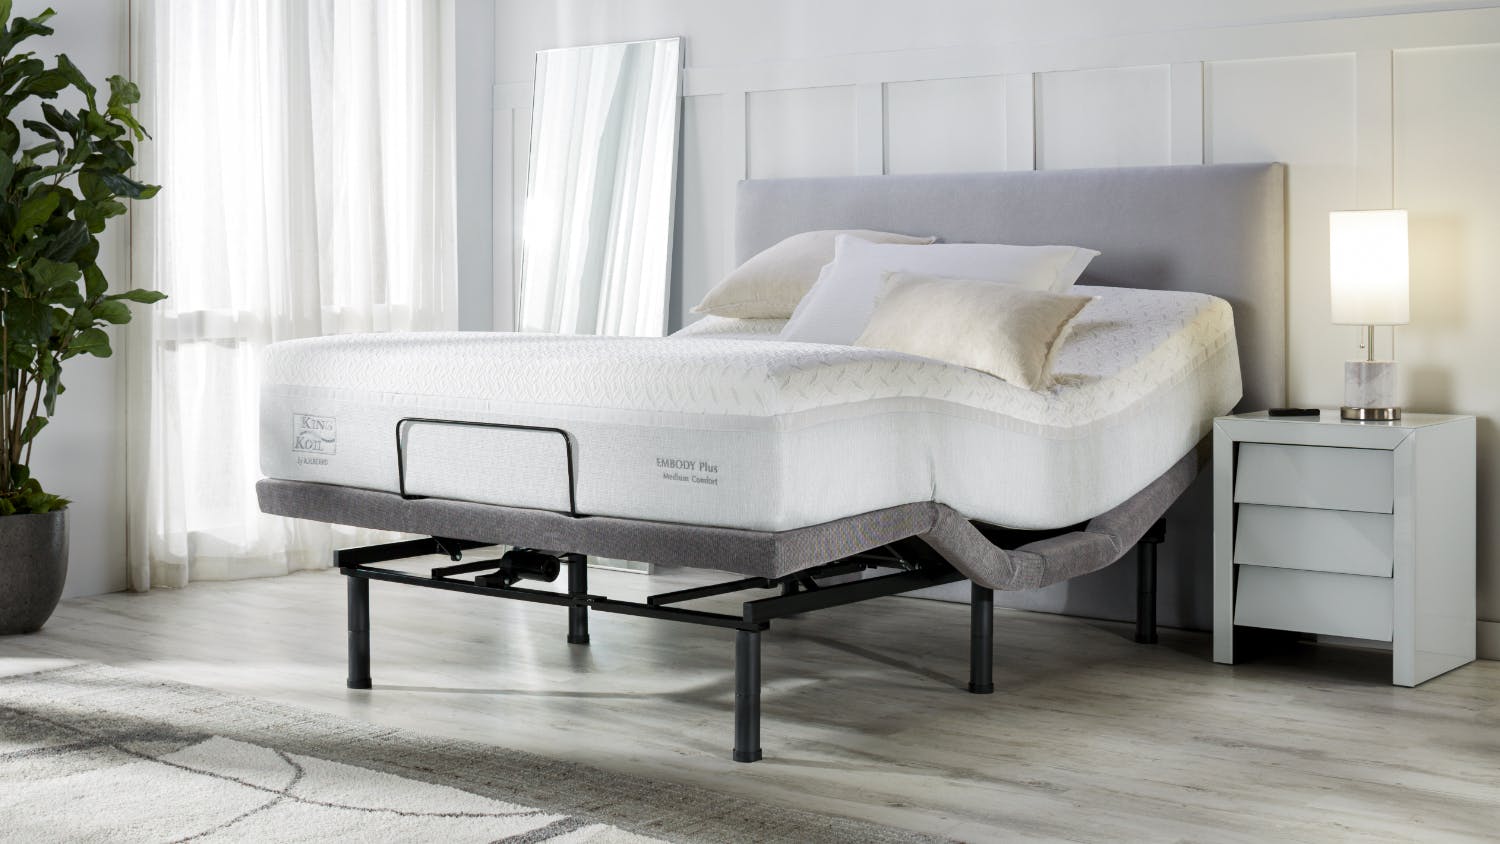 King Coil Embody Plus Medium Queen Mattress with Renew Zero Clearance Dark Grey Adjustable Base by A.H Beard